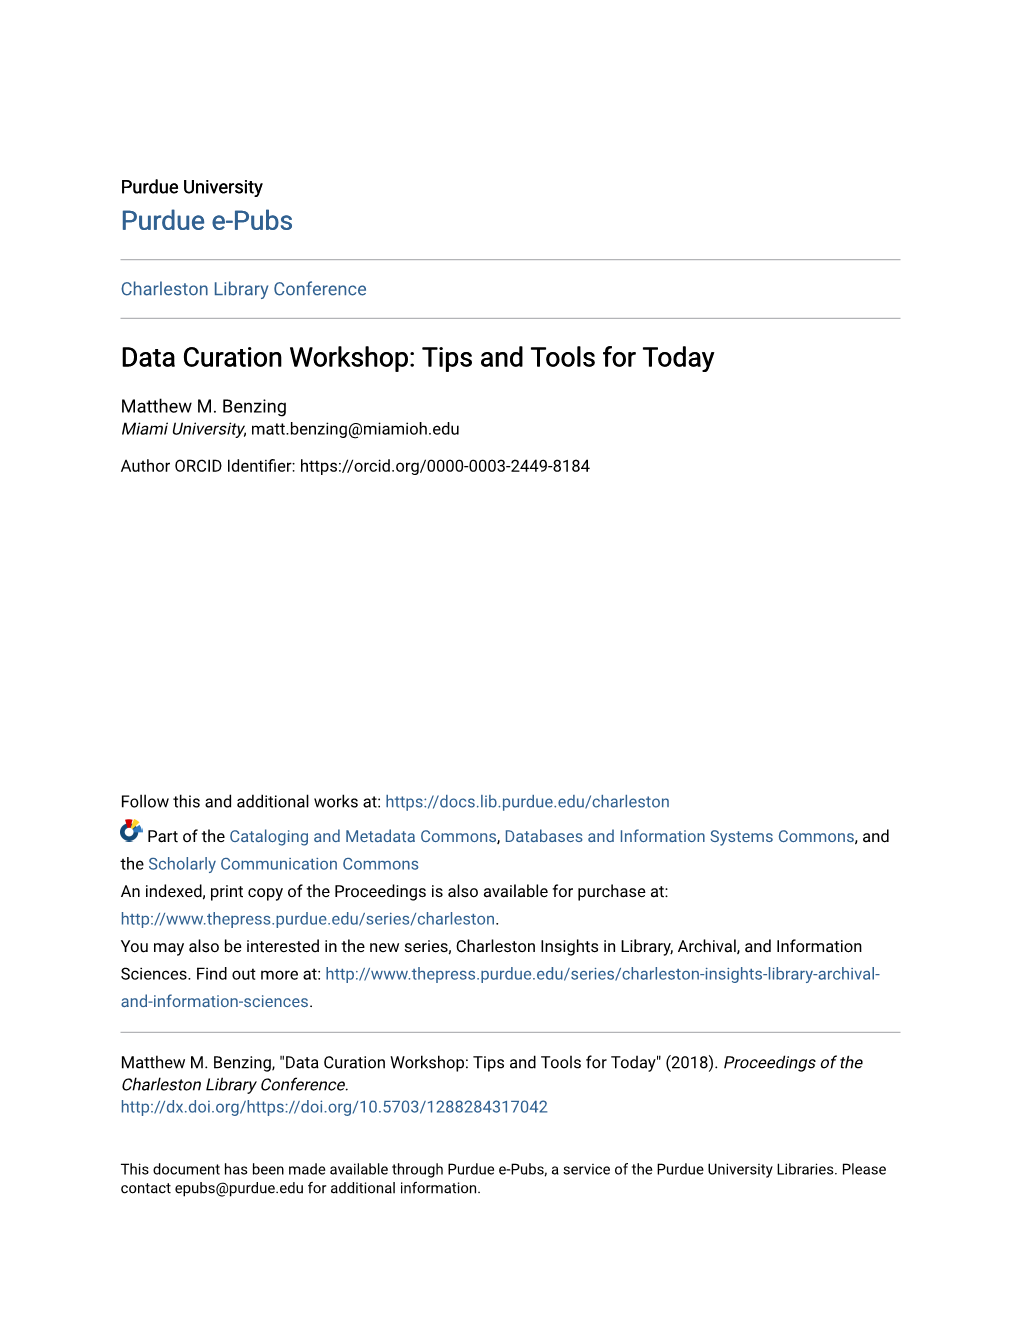 Data Curation Workshop: Tips and Tools for Today